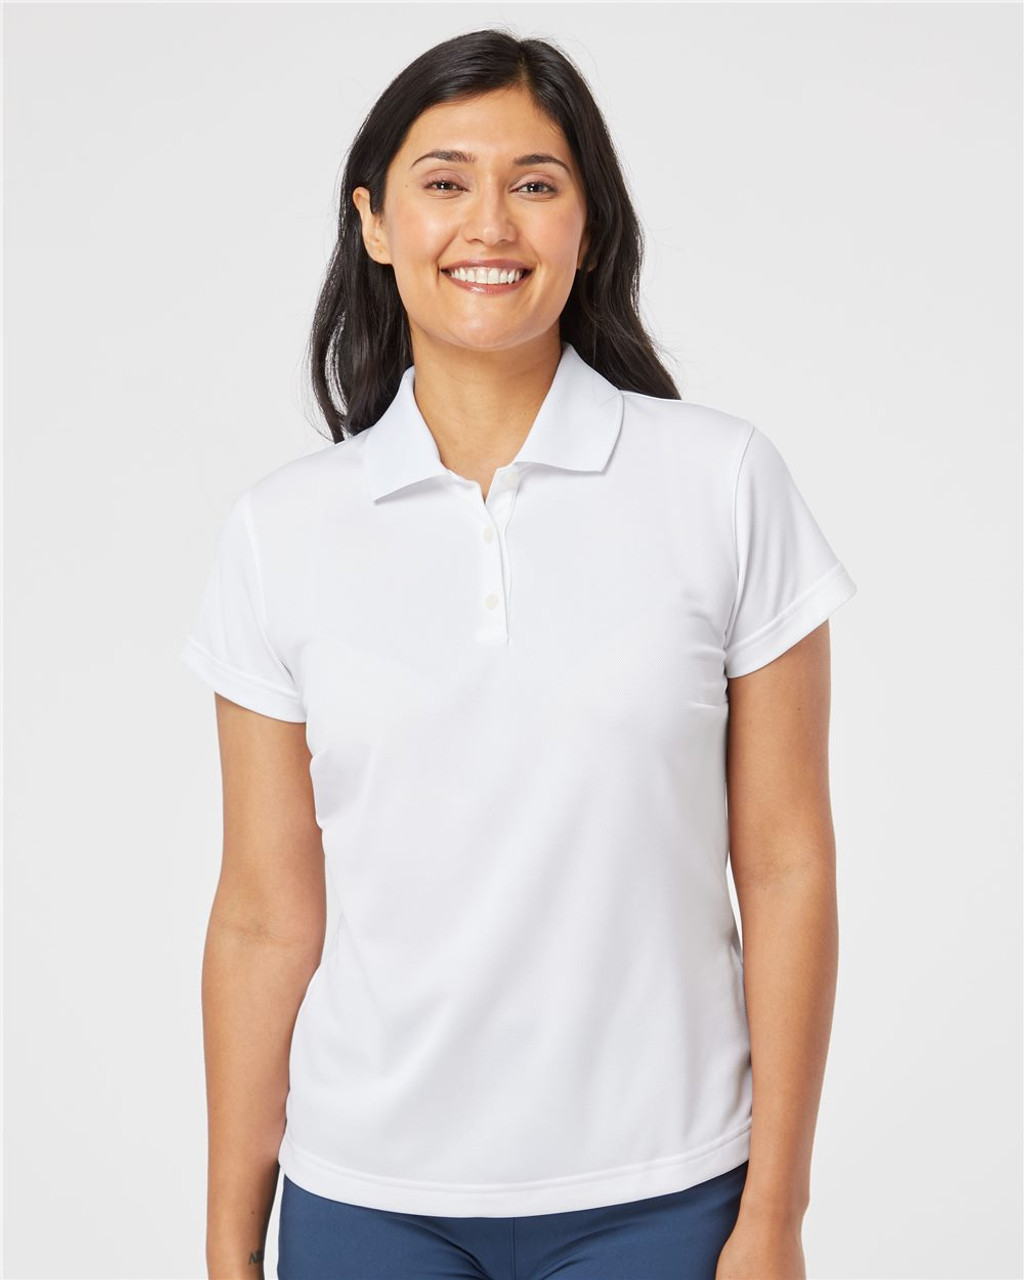 Embroidered Women's Basic Polo - A131